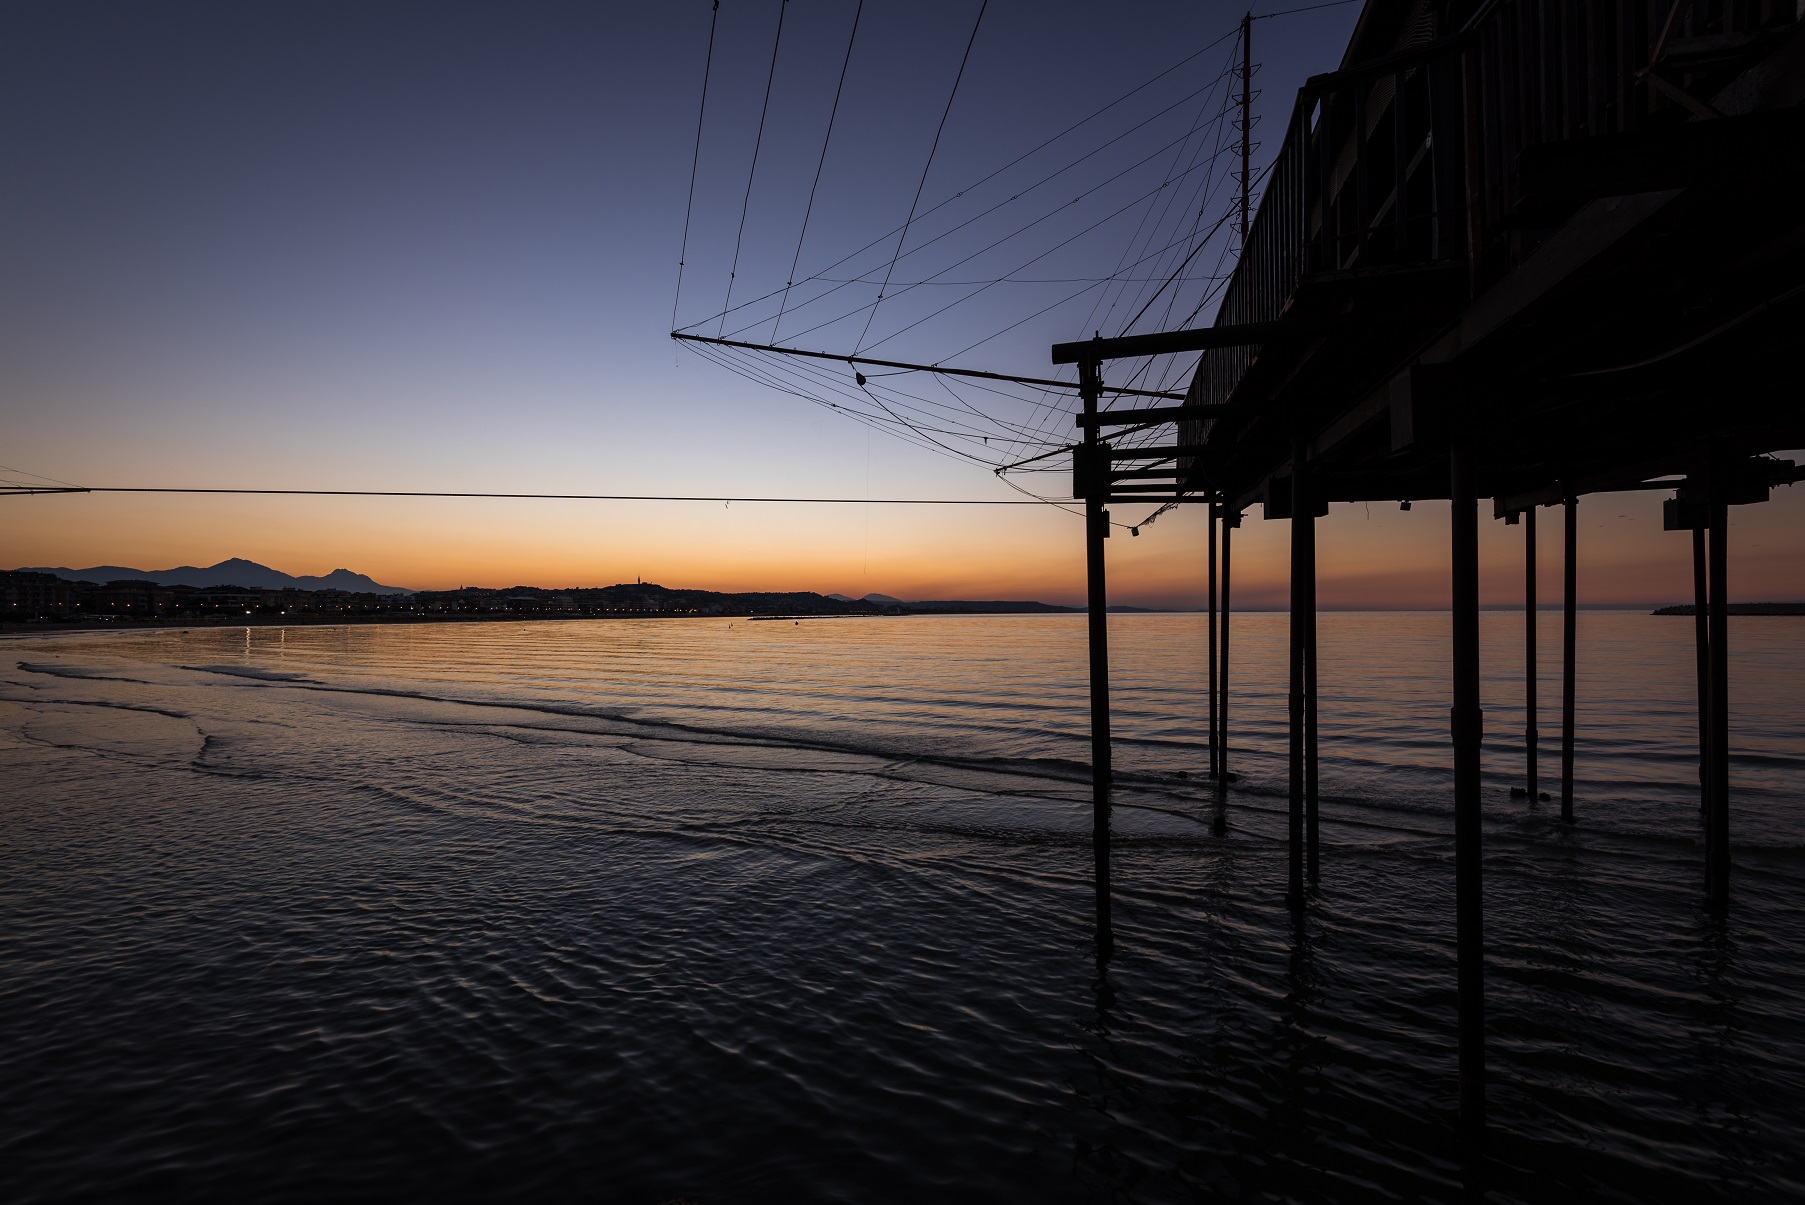 Sunset on the trabocco...